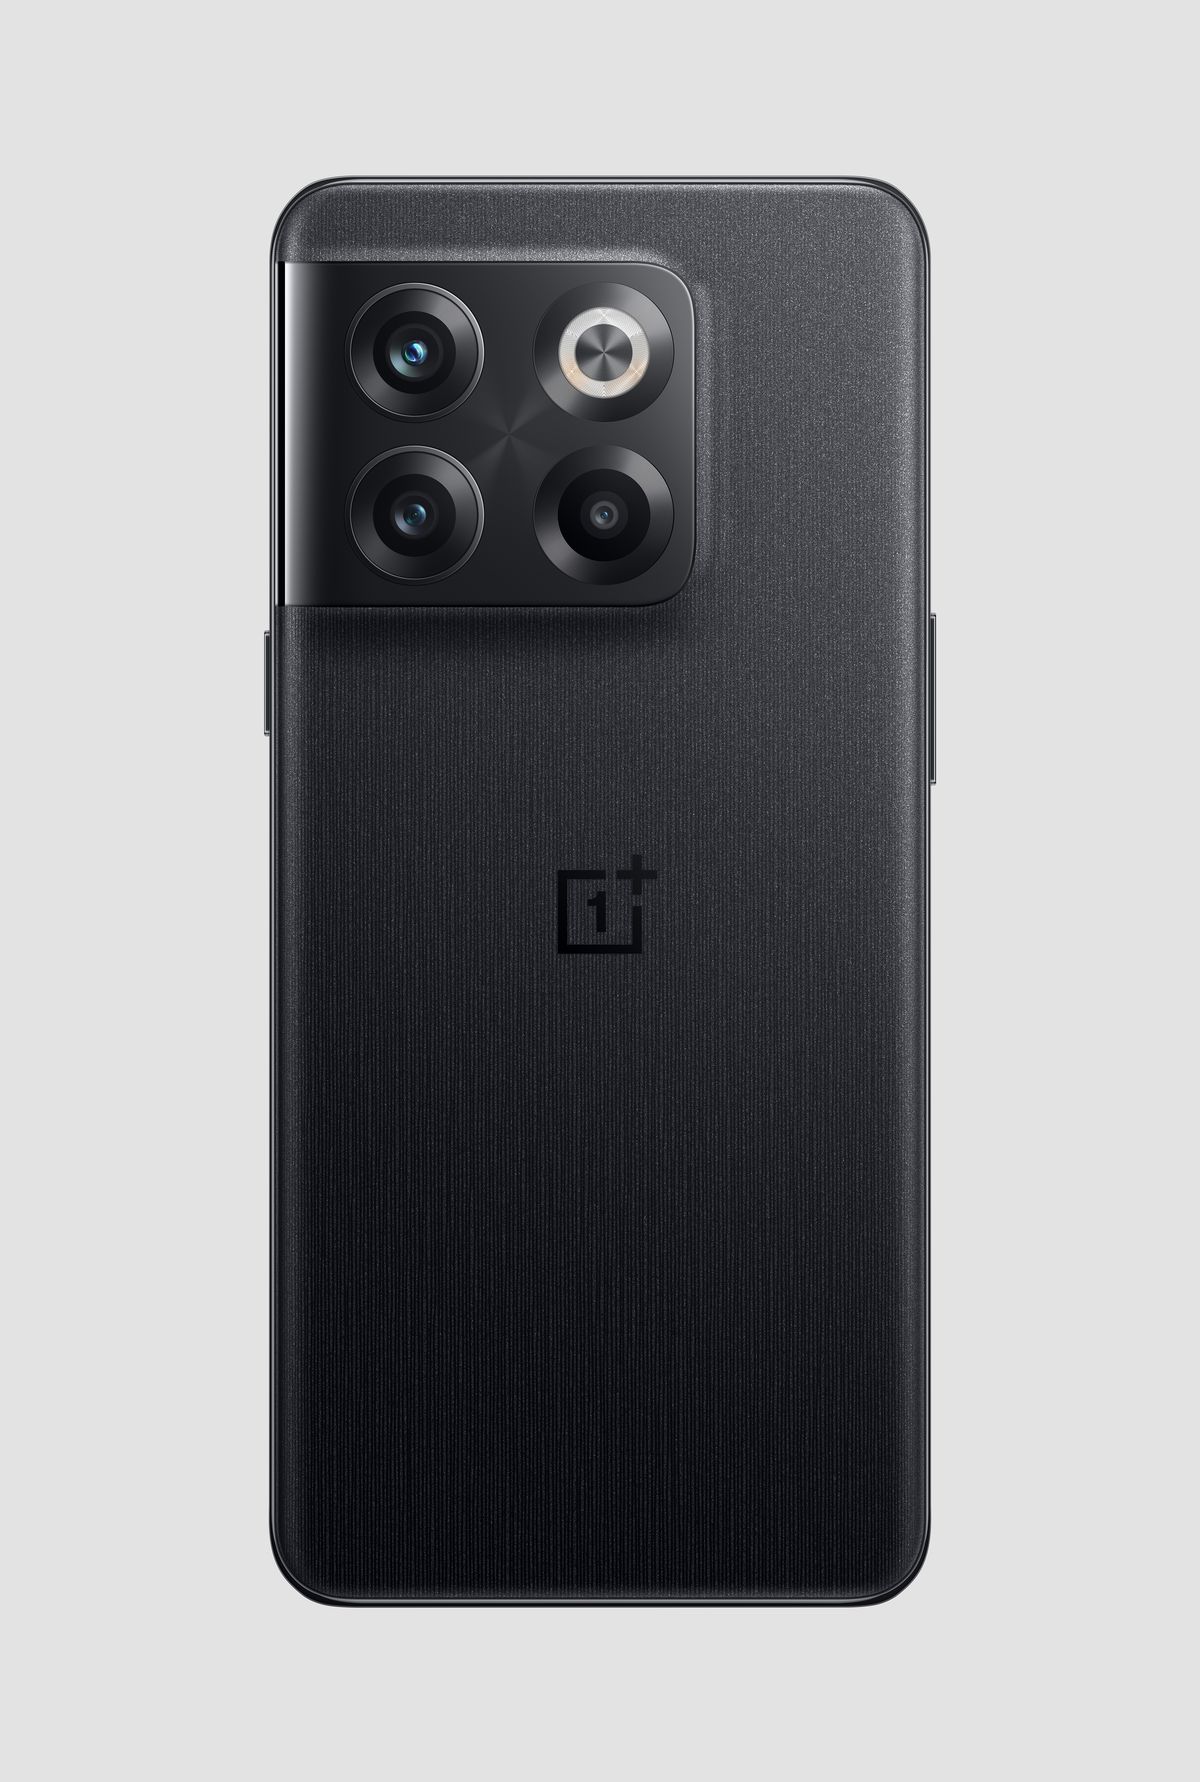 1658732433 247 the oneplus 10t doesnt have a mute switch heres